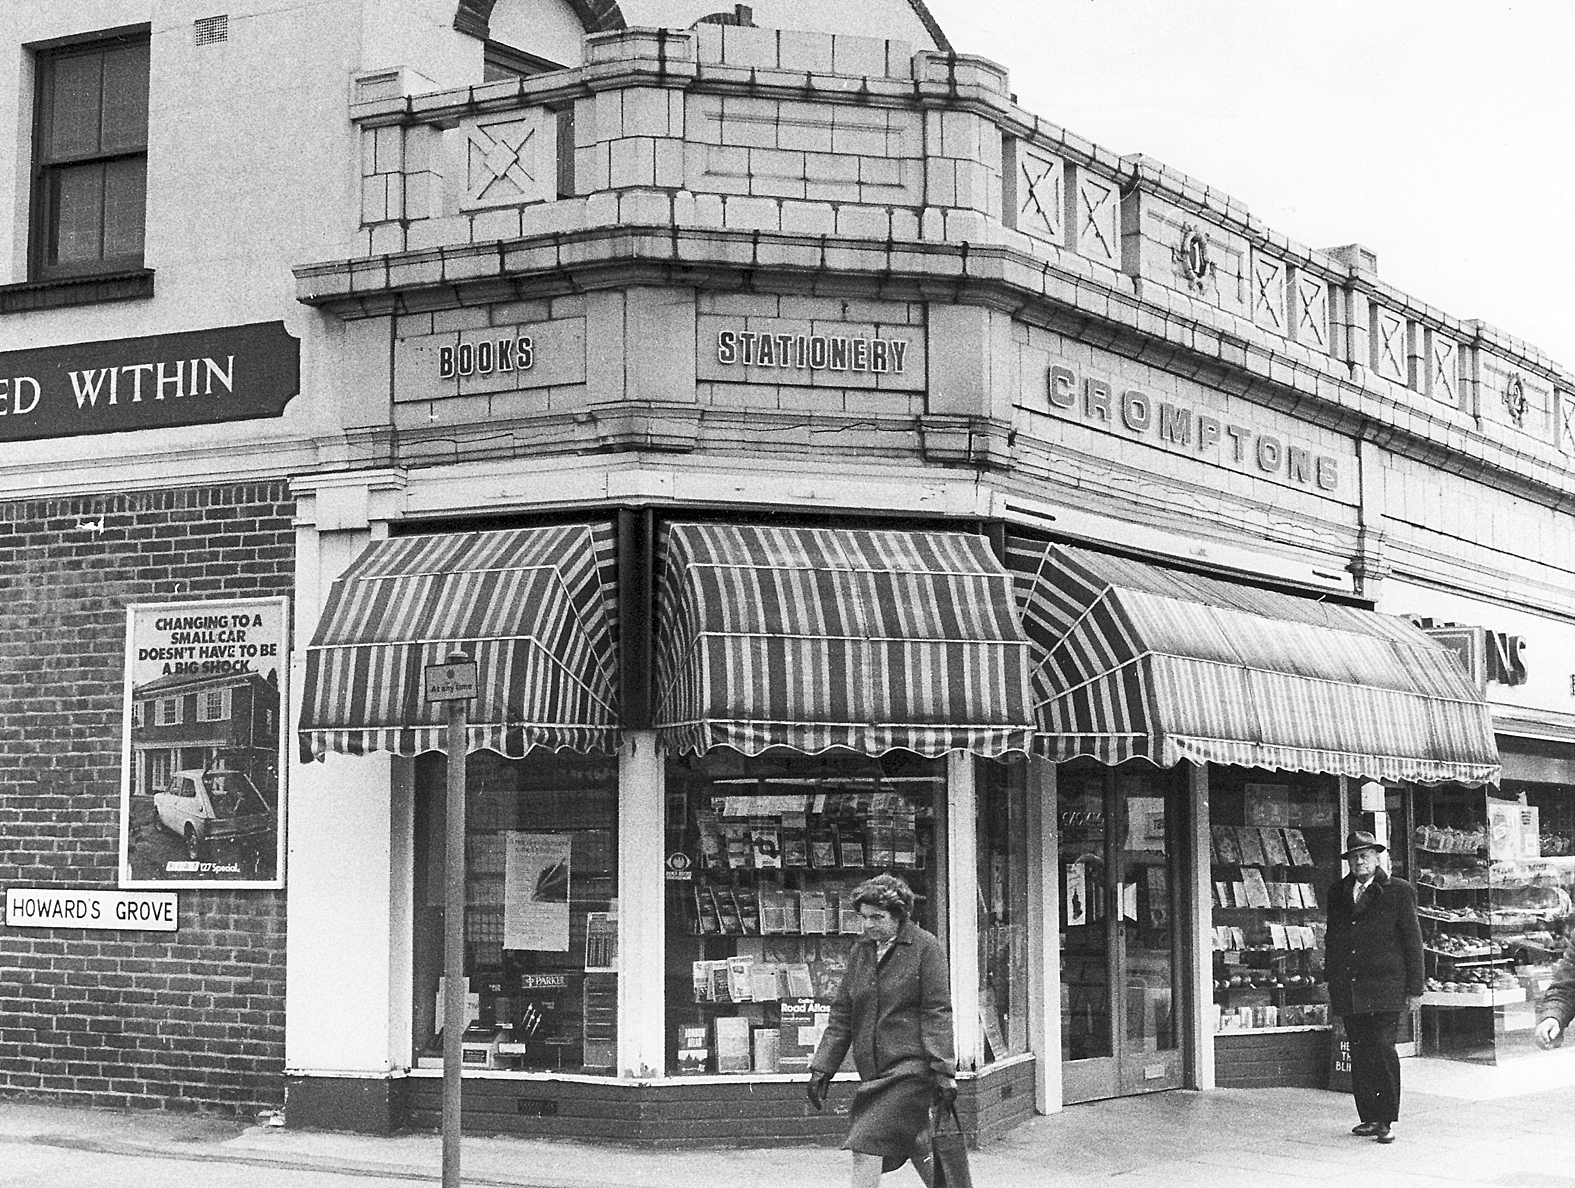 Cromptons stationers on the corner of Howards Grove and Shirley High Street 1976